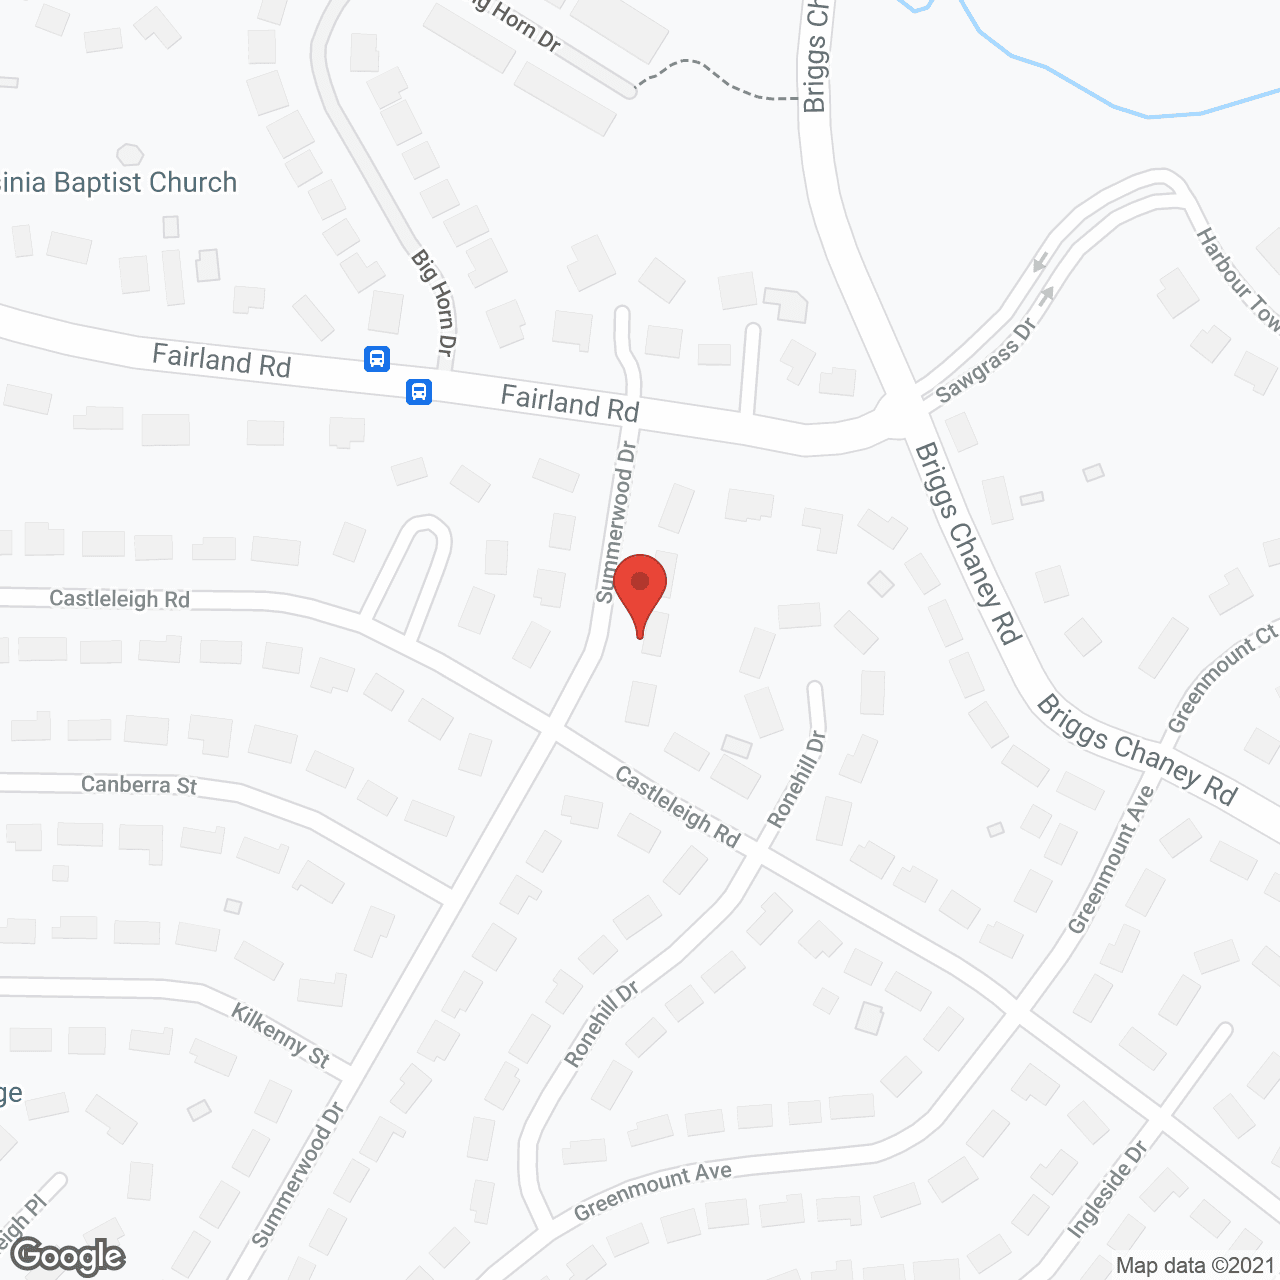 Summerwood Garden Assisted Living in google map